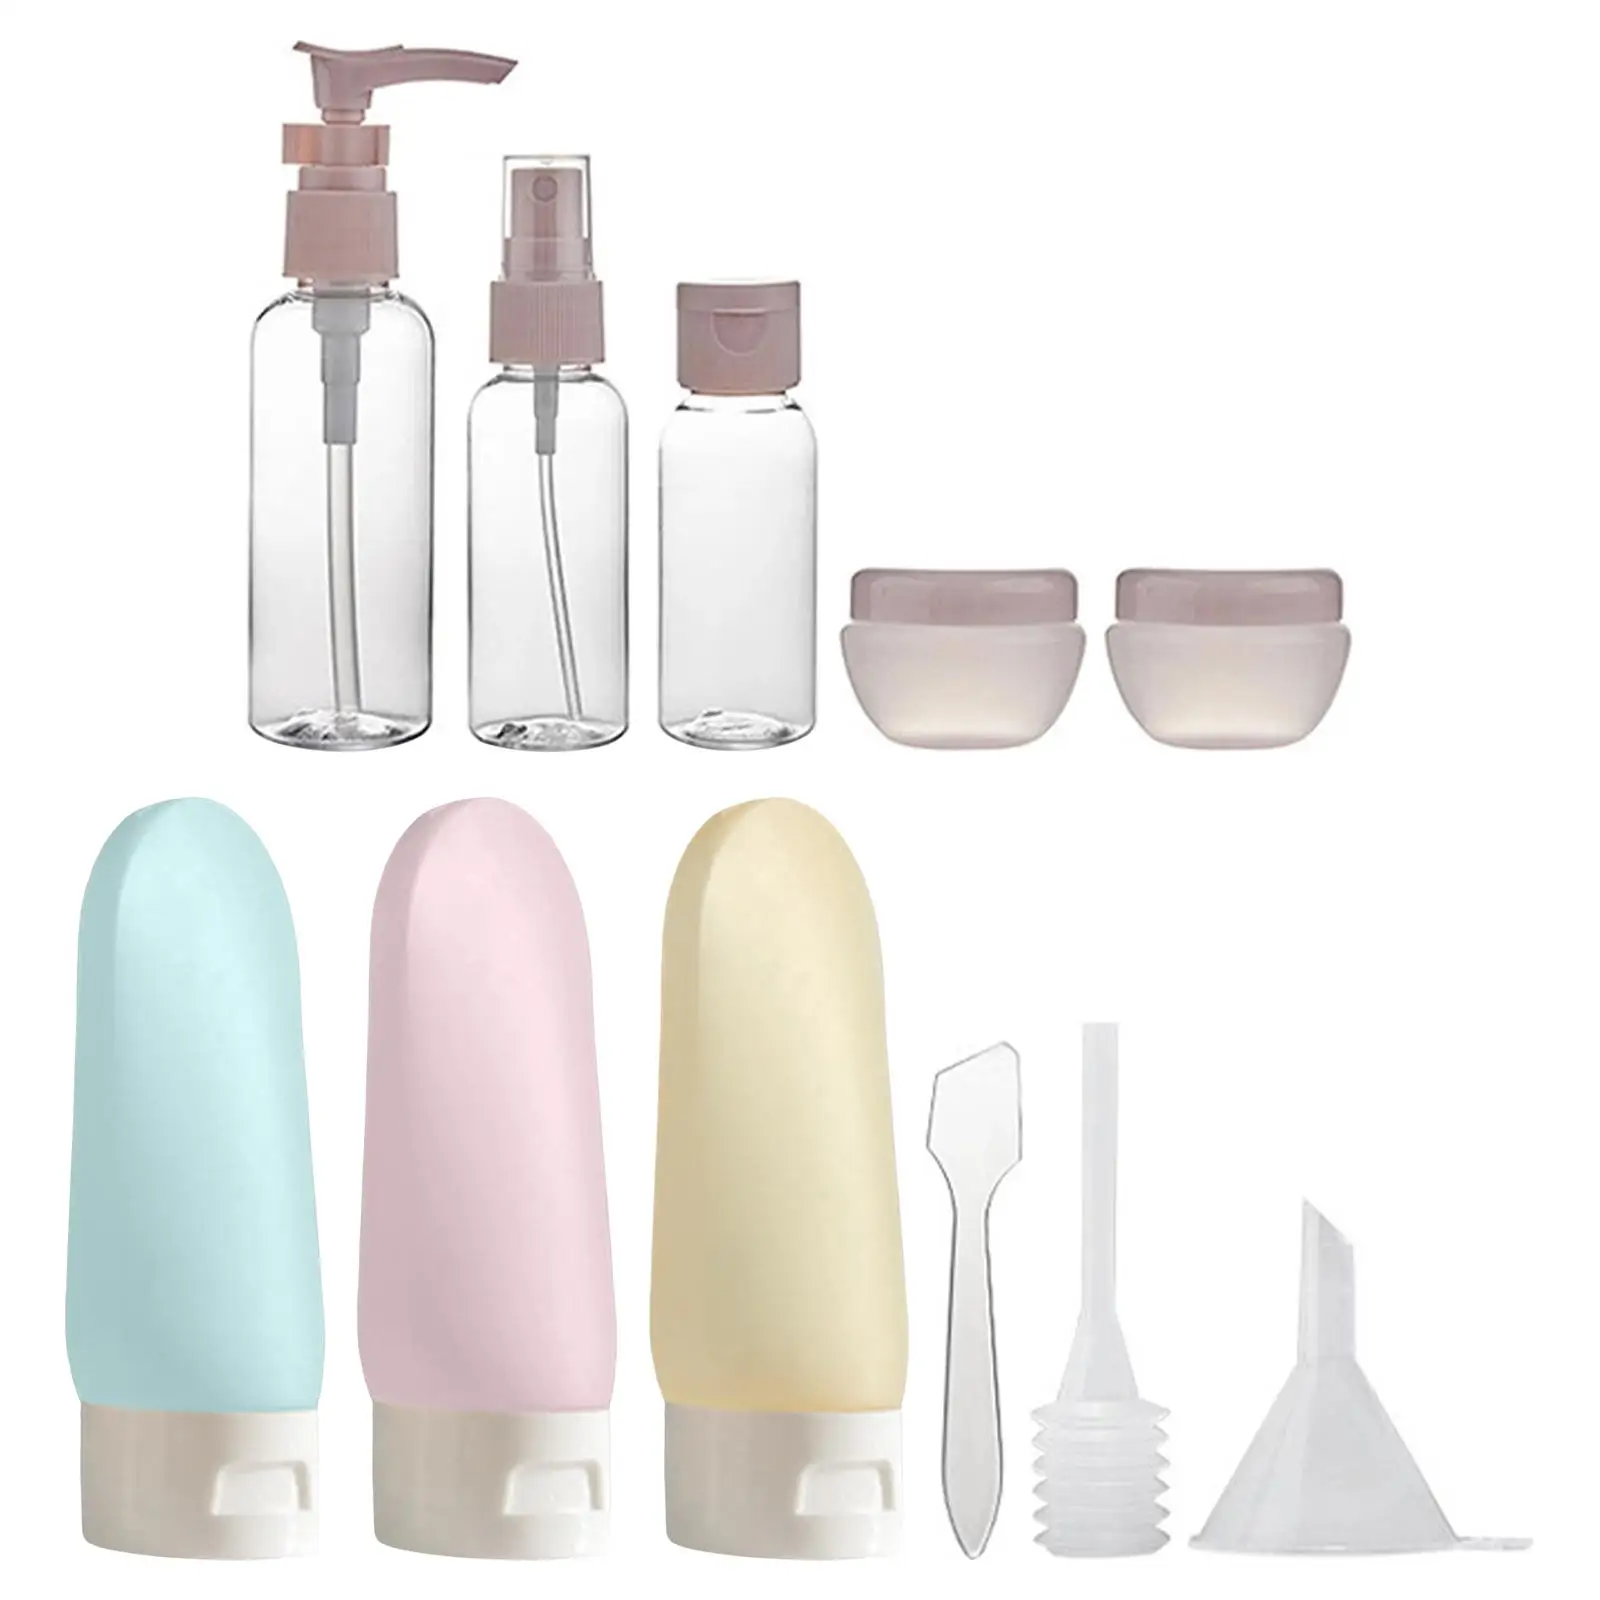 Toiletries Set Accessories 11 Travel Bottles Bottles Makeup Travel Container for Camping Child travel